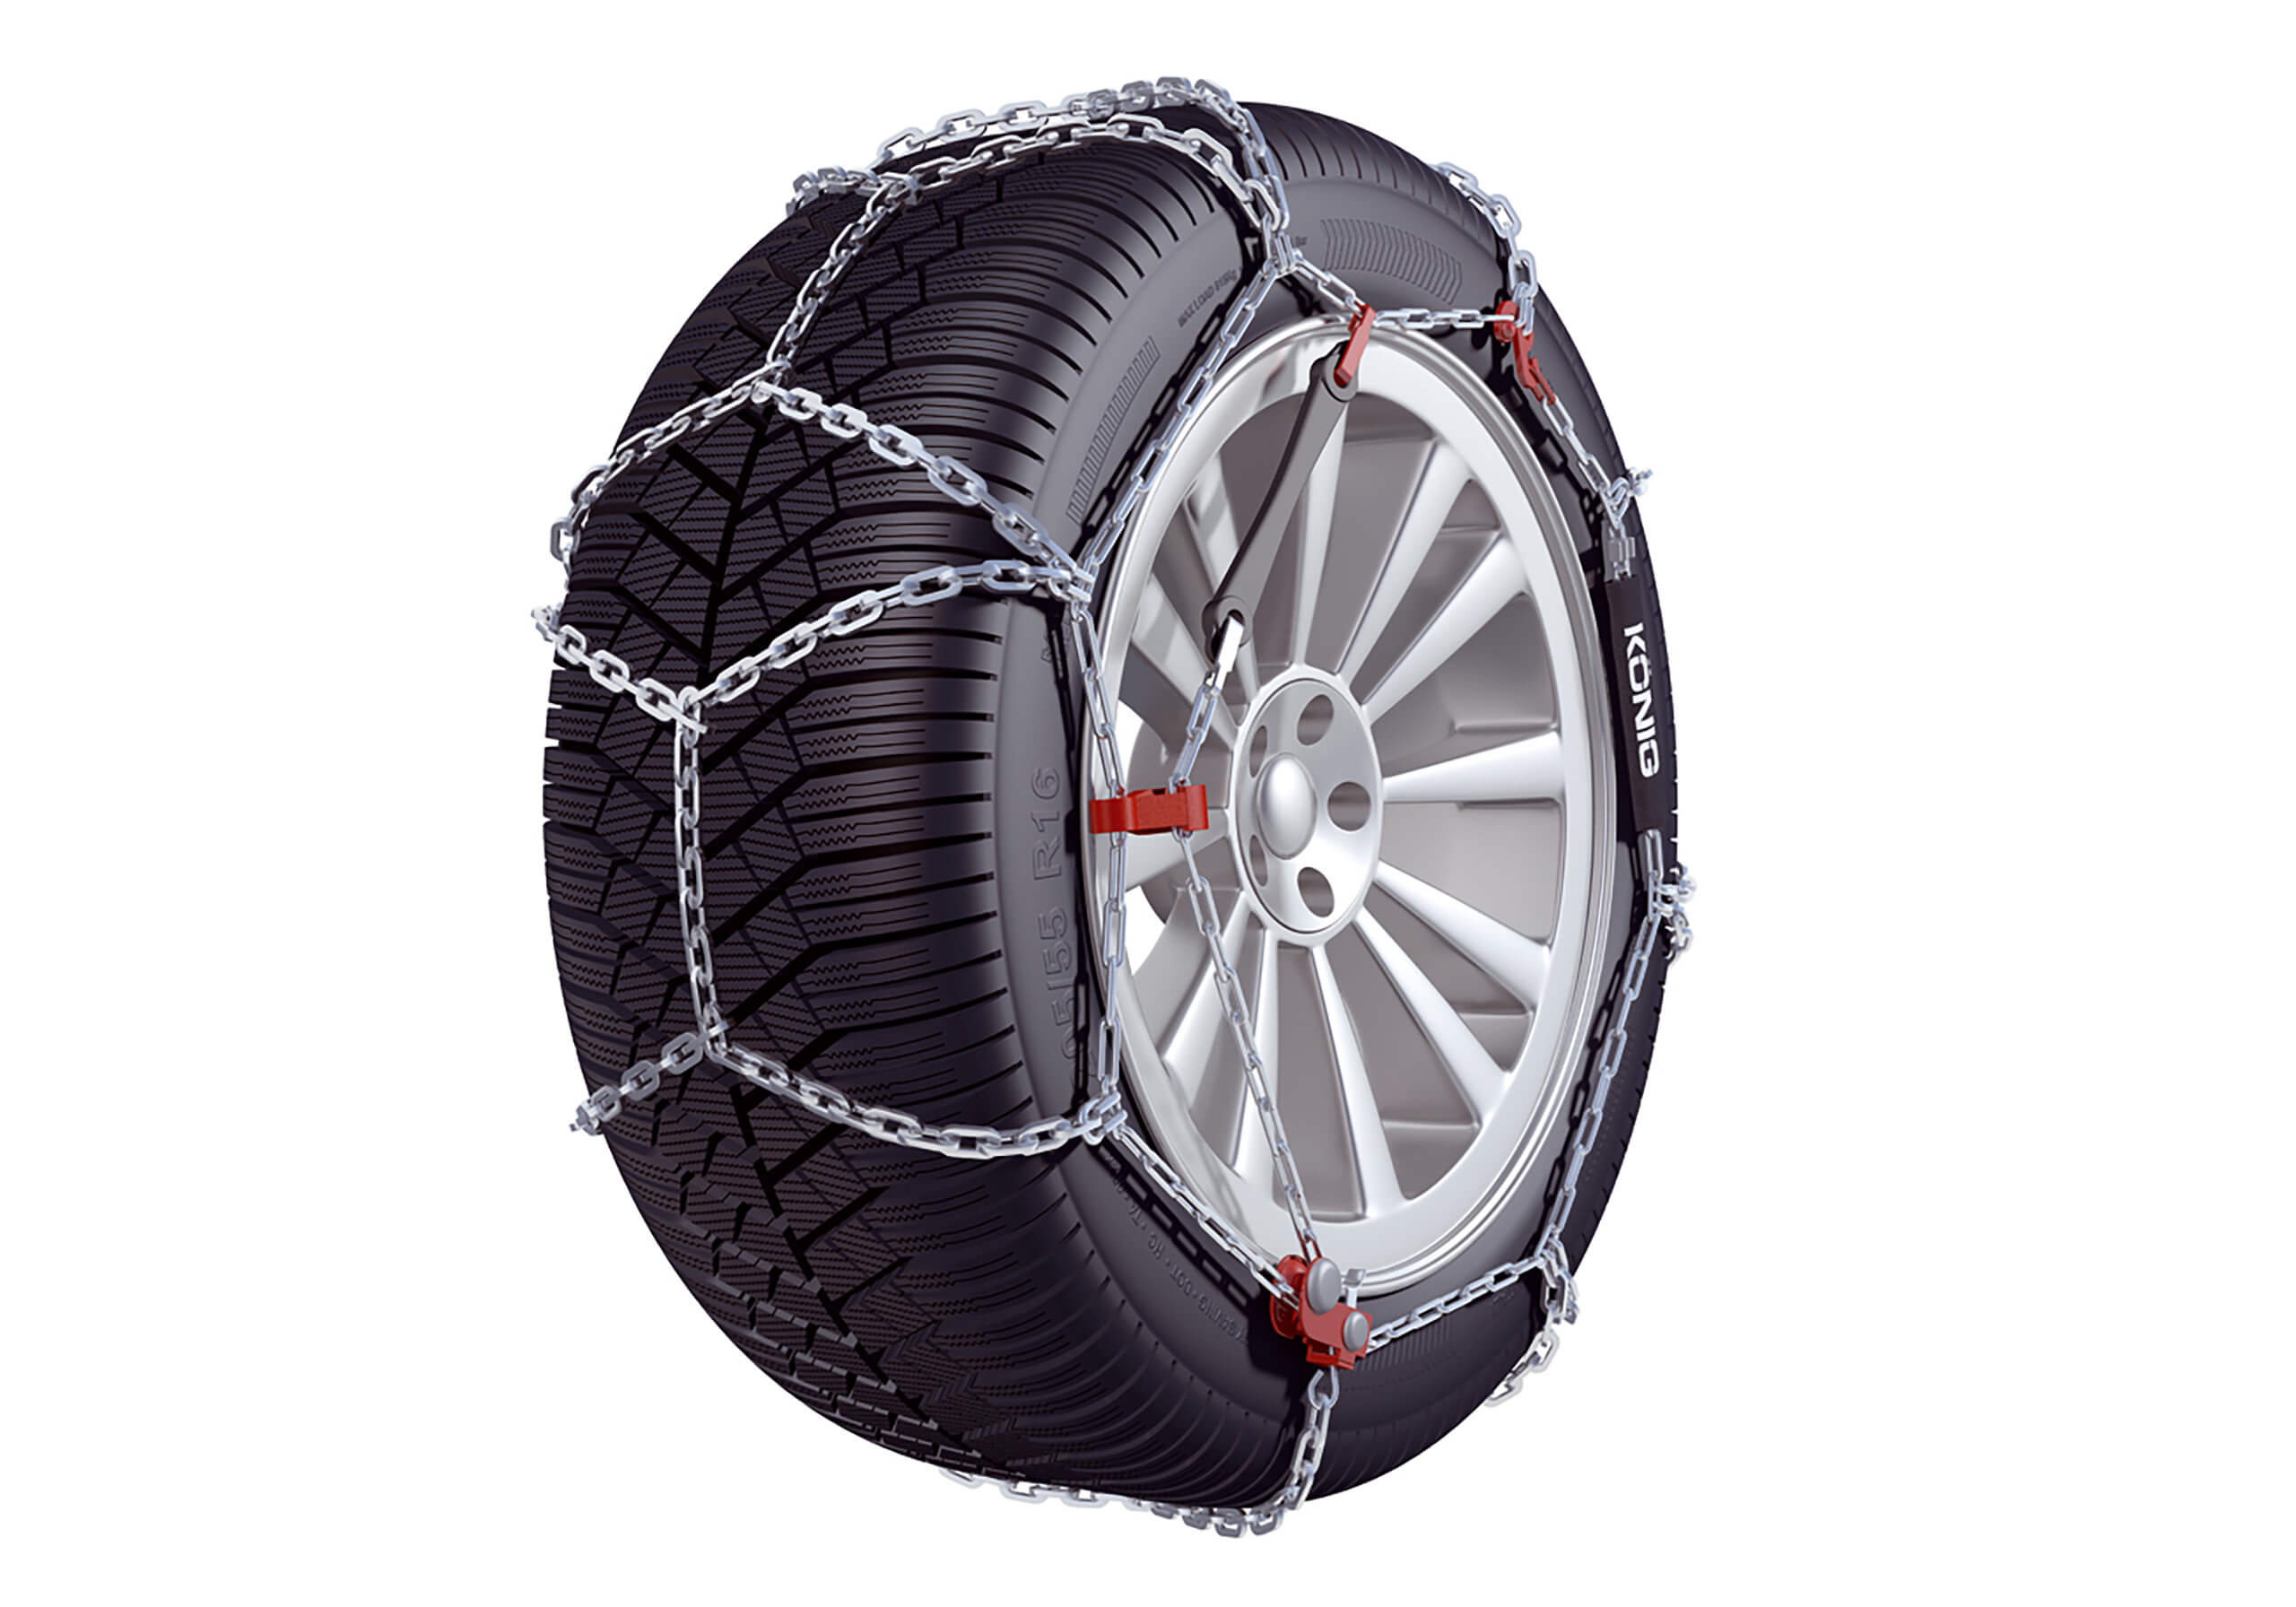 Mazda 626 four door saloon (1998 to 2002):Knig CB-12 snow chains (pair) no. CB-12 070